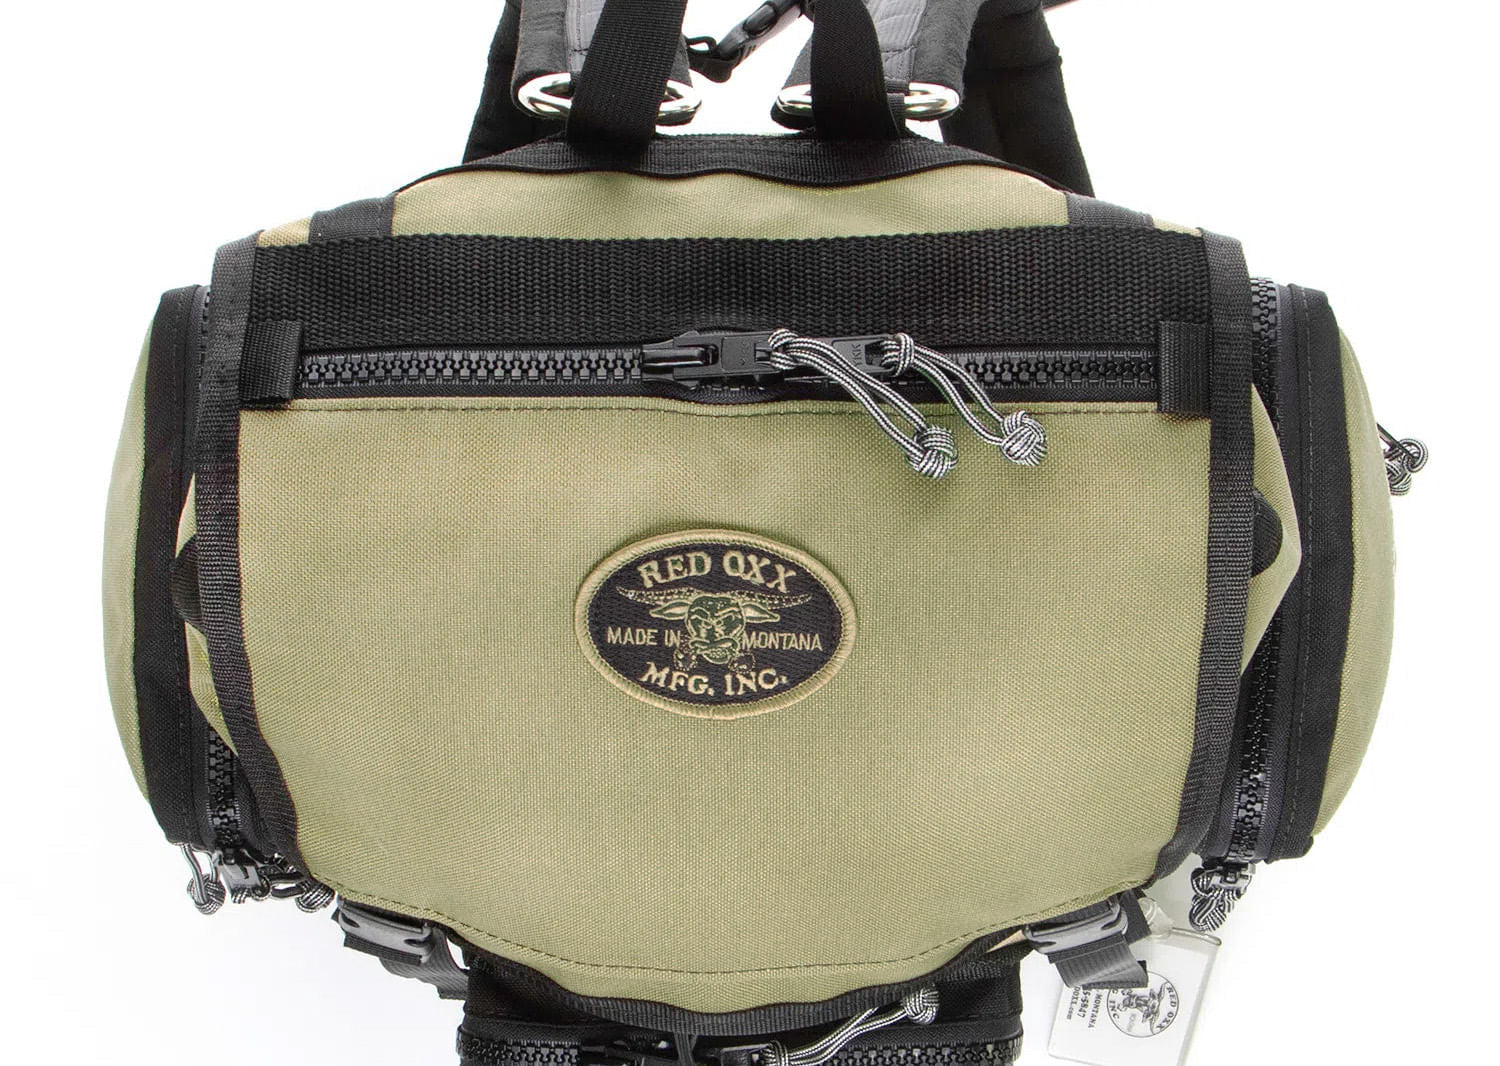 Top view of the C ruck zippered flap pocket.